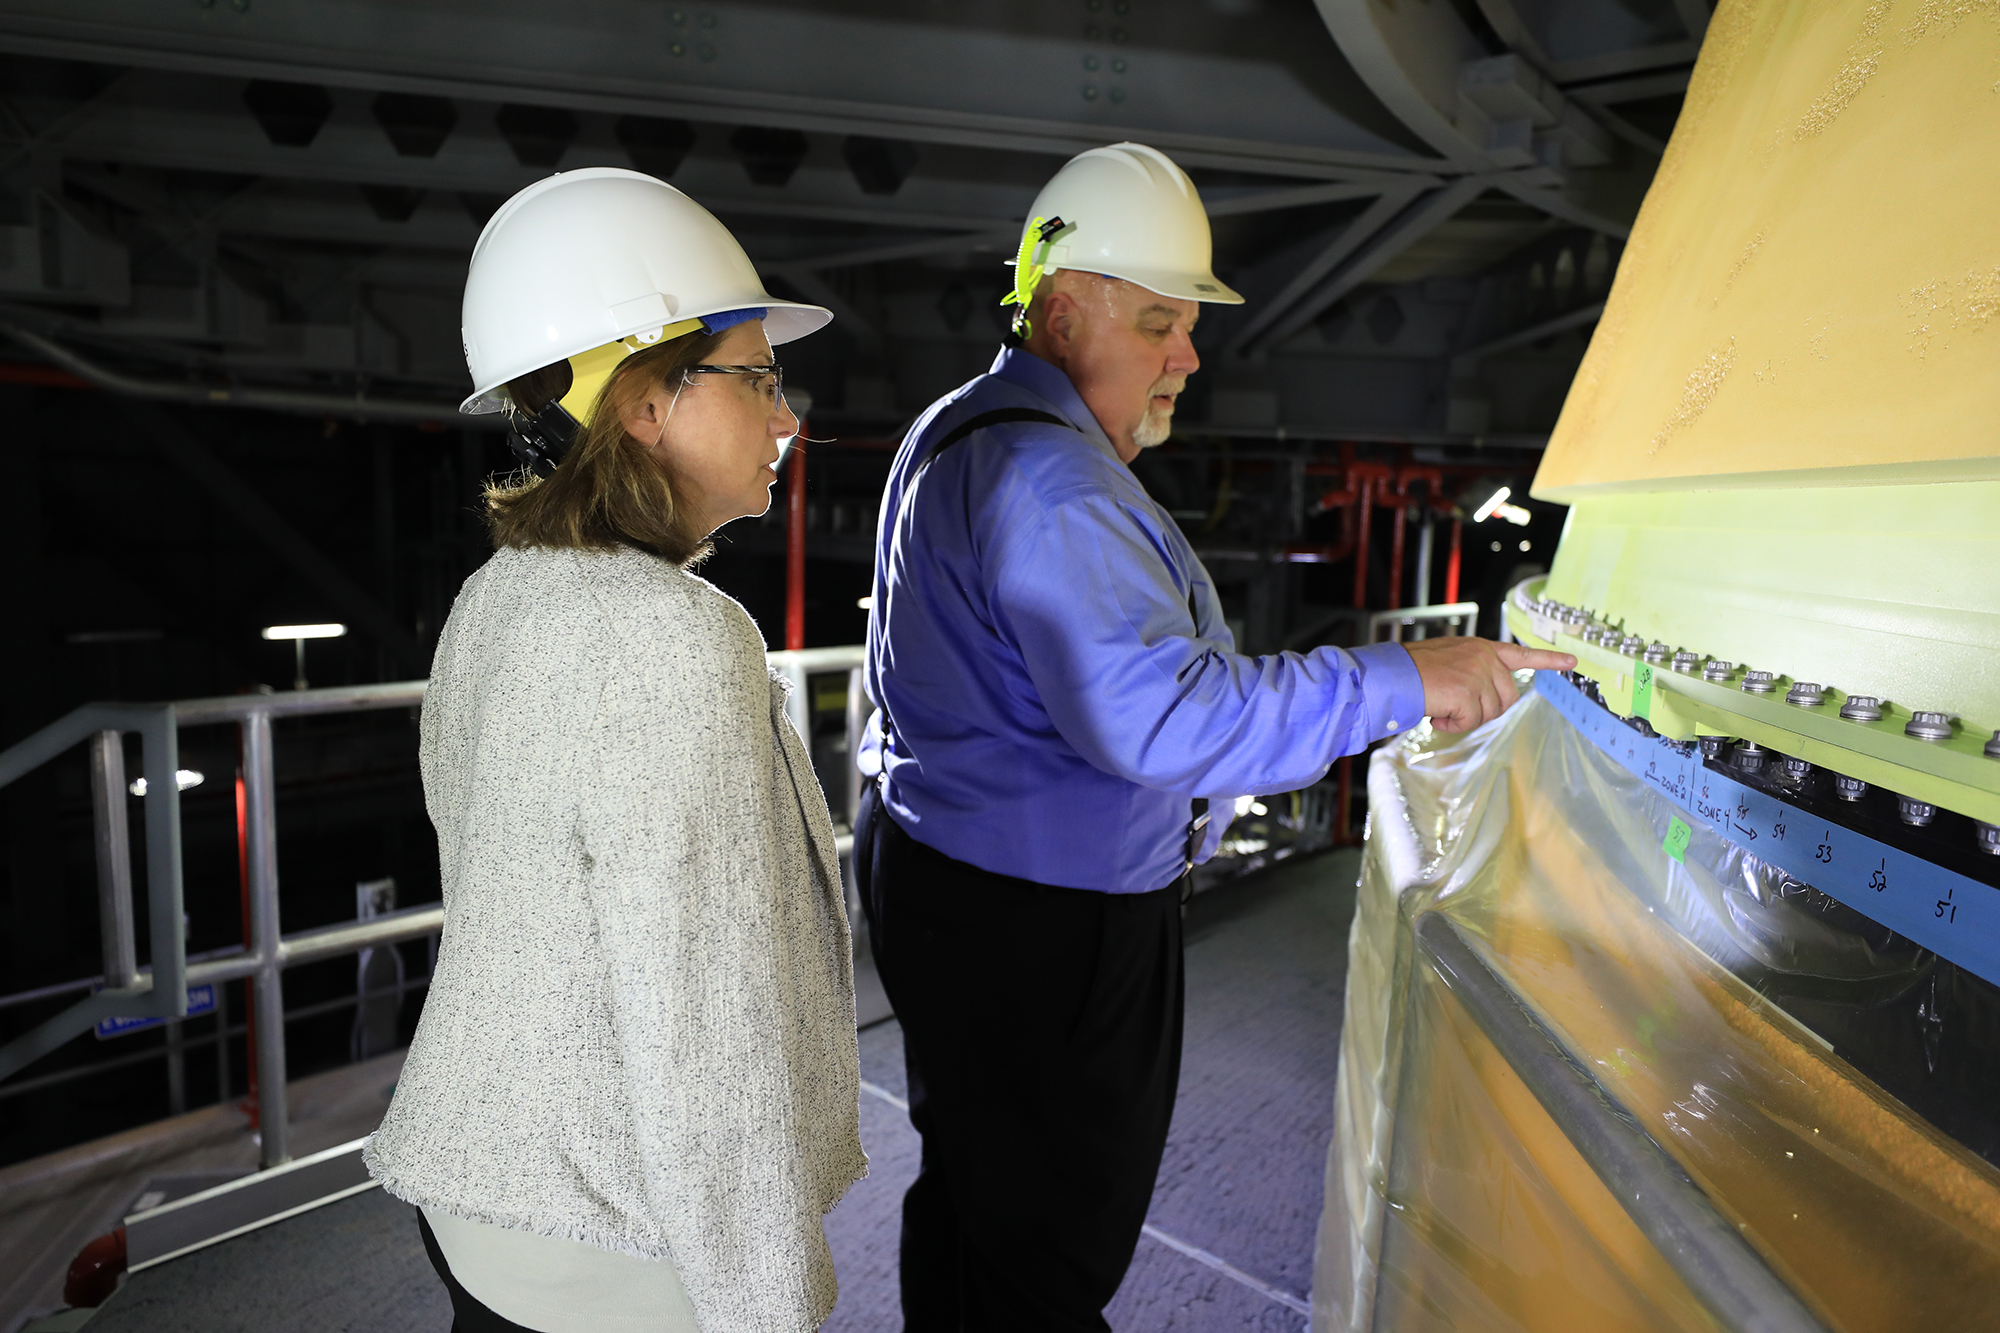 Space Launch System (SLS) Program Manager John Honeycutt and Orion Program Manager Catherine Koerner.